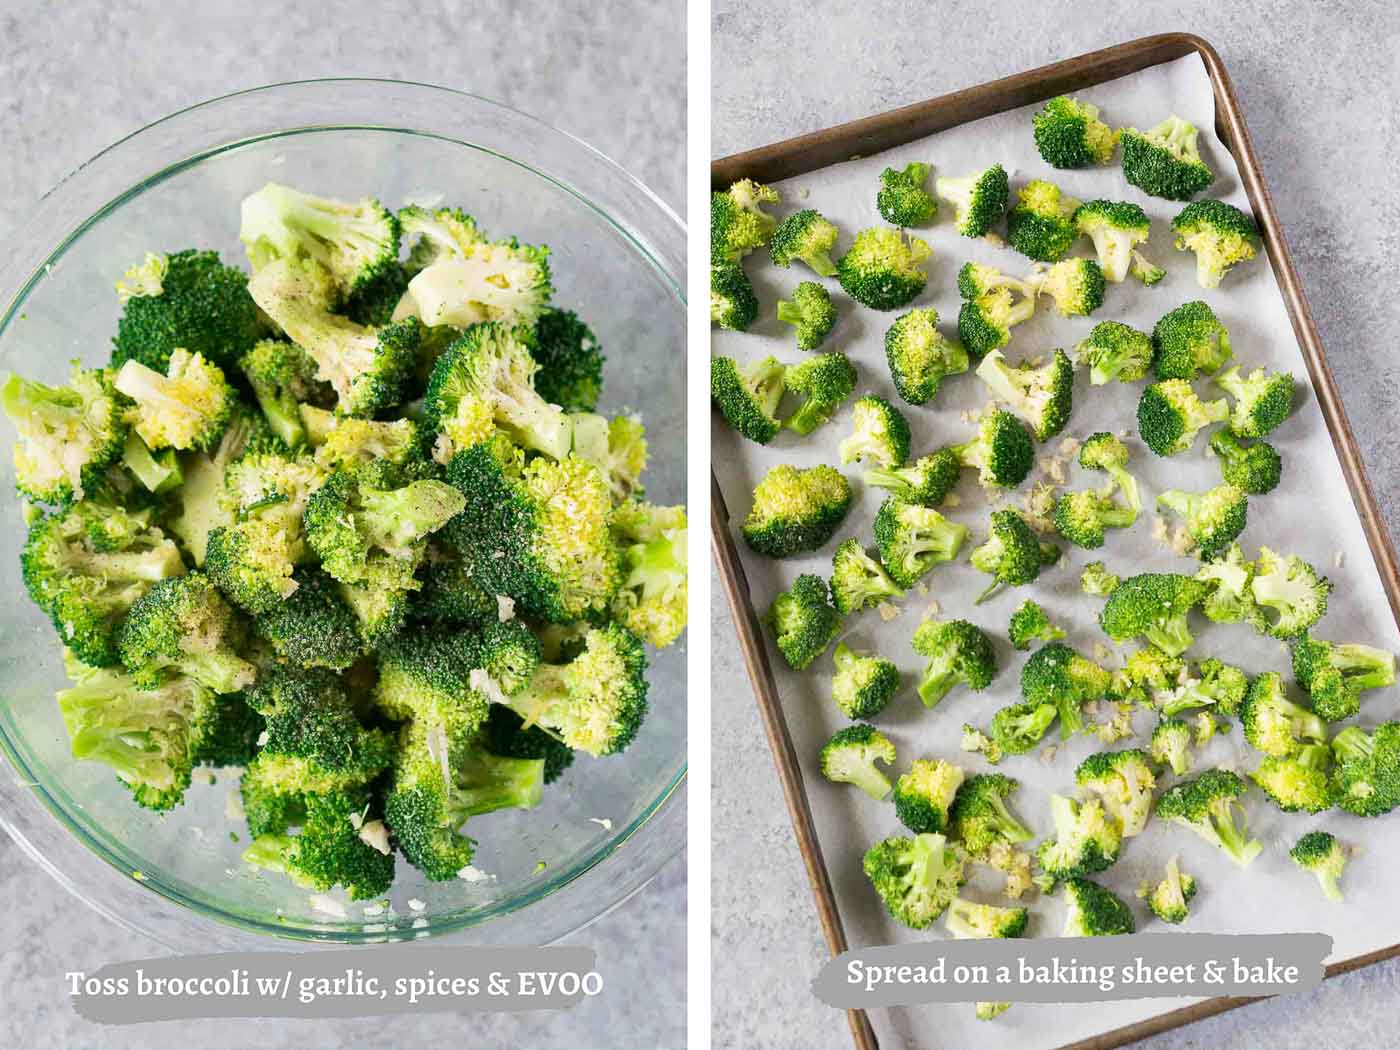 process images of how to roast broccoli